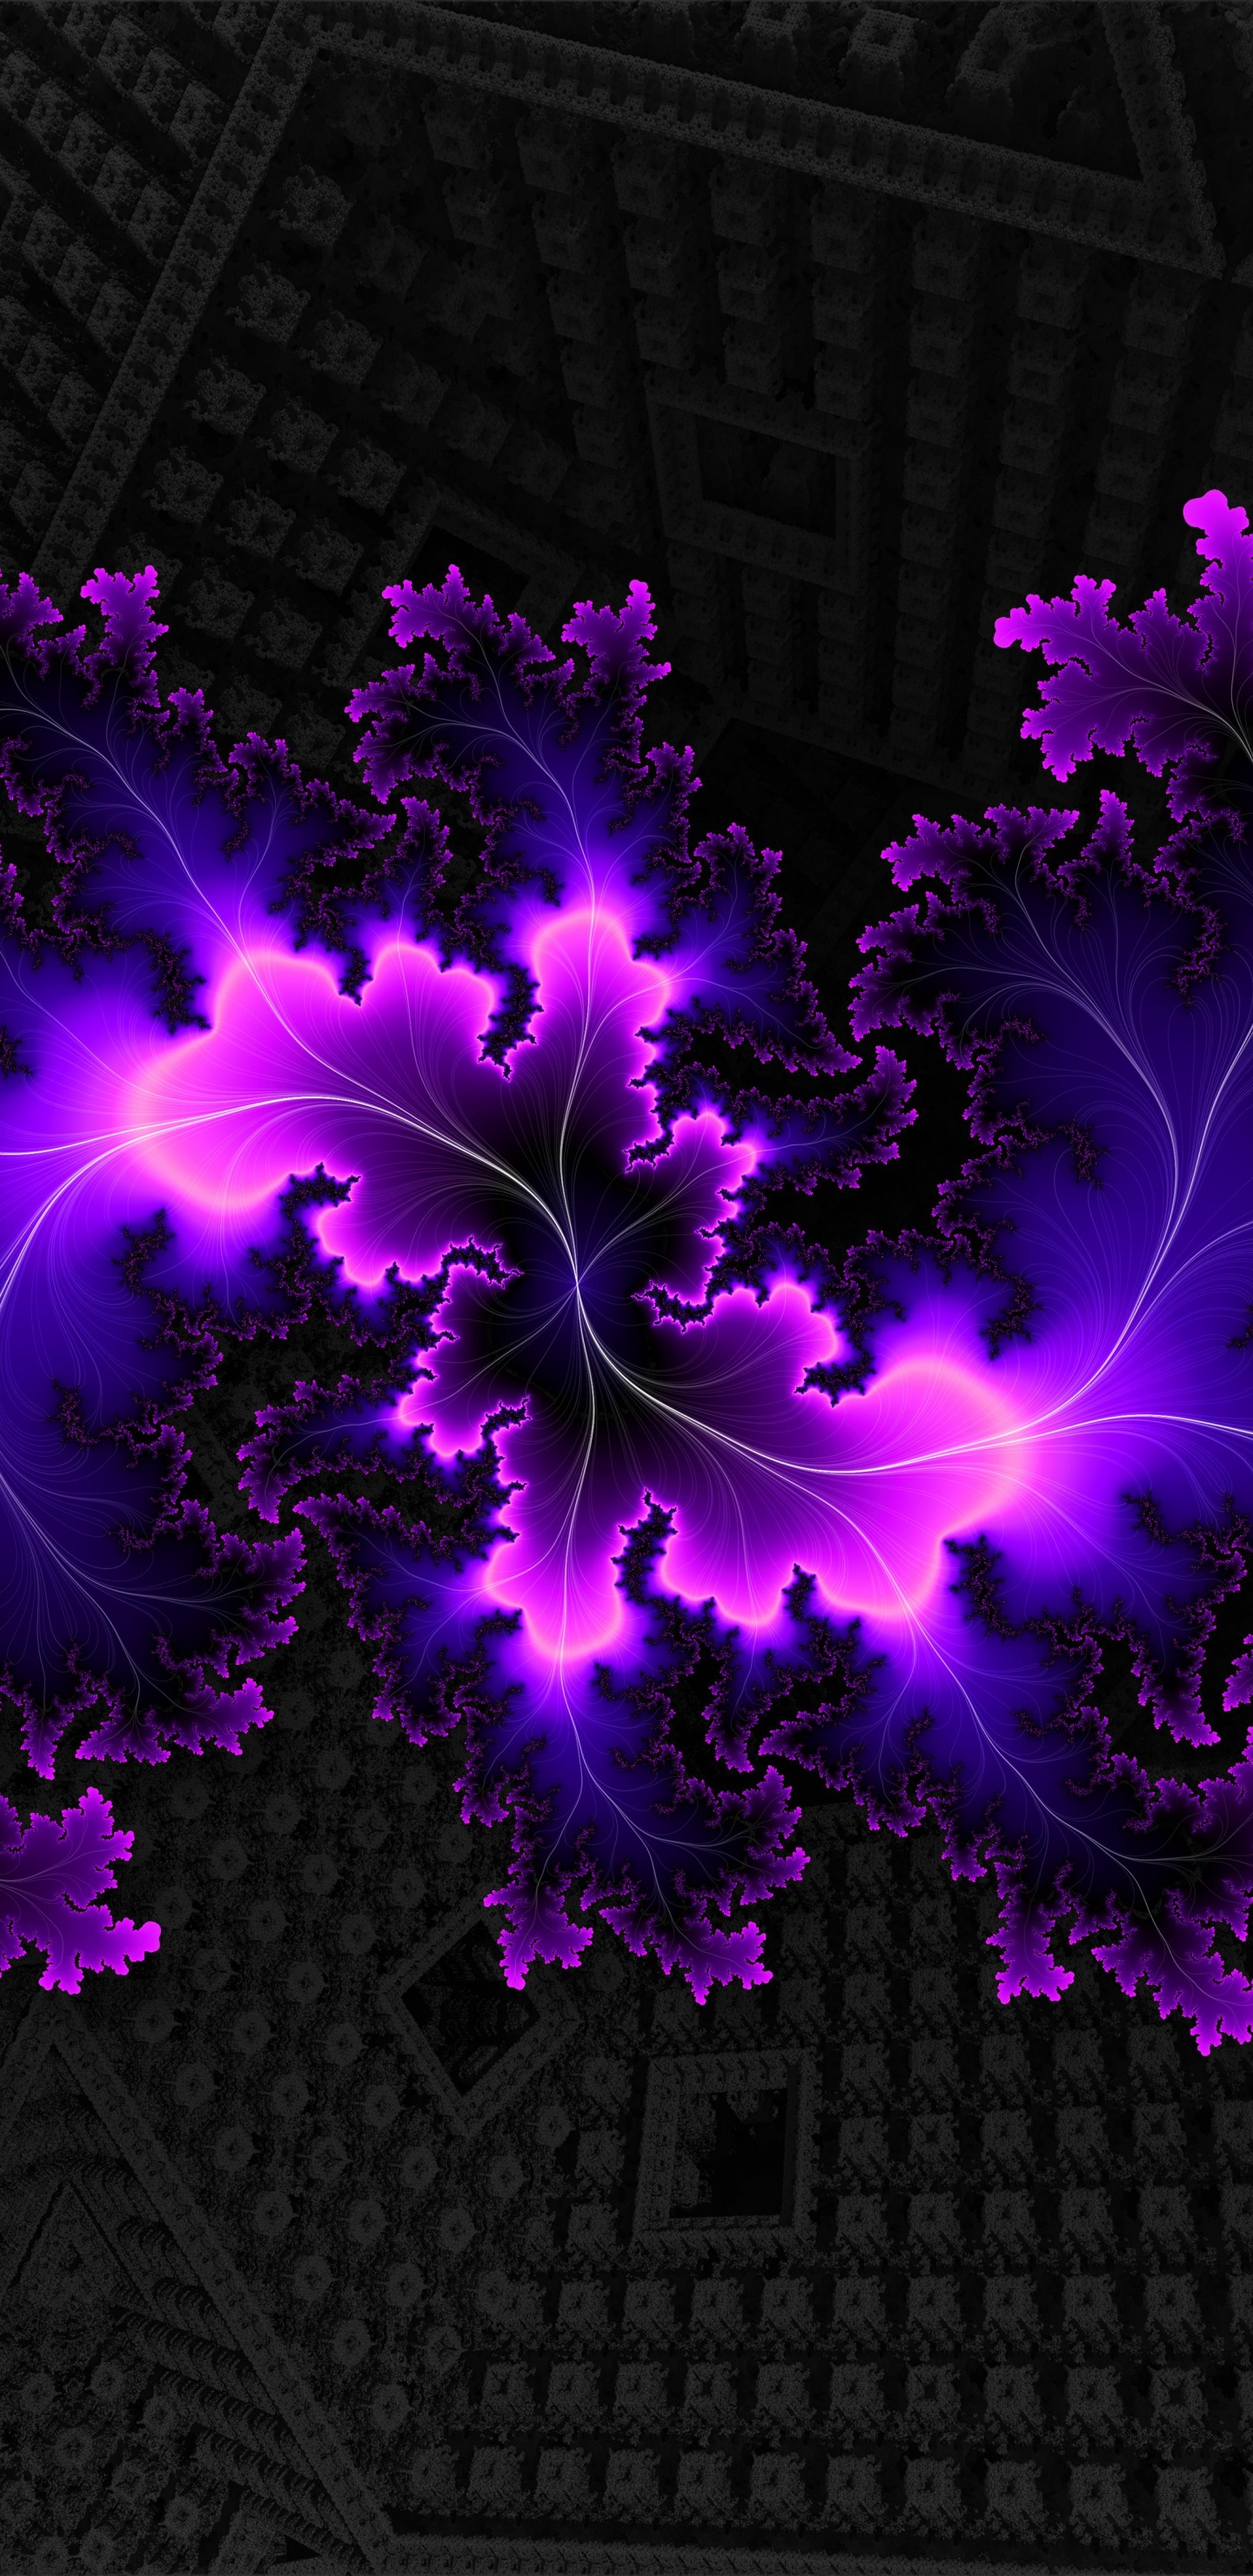 Purple Flower Petals on Black and White Textile. Wallpaper in 1440x2960 Resolution